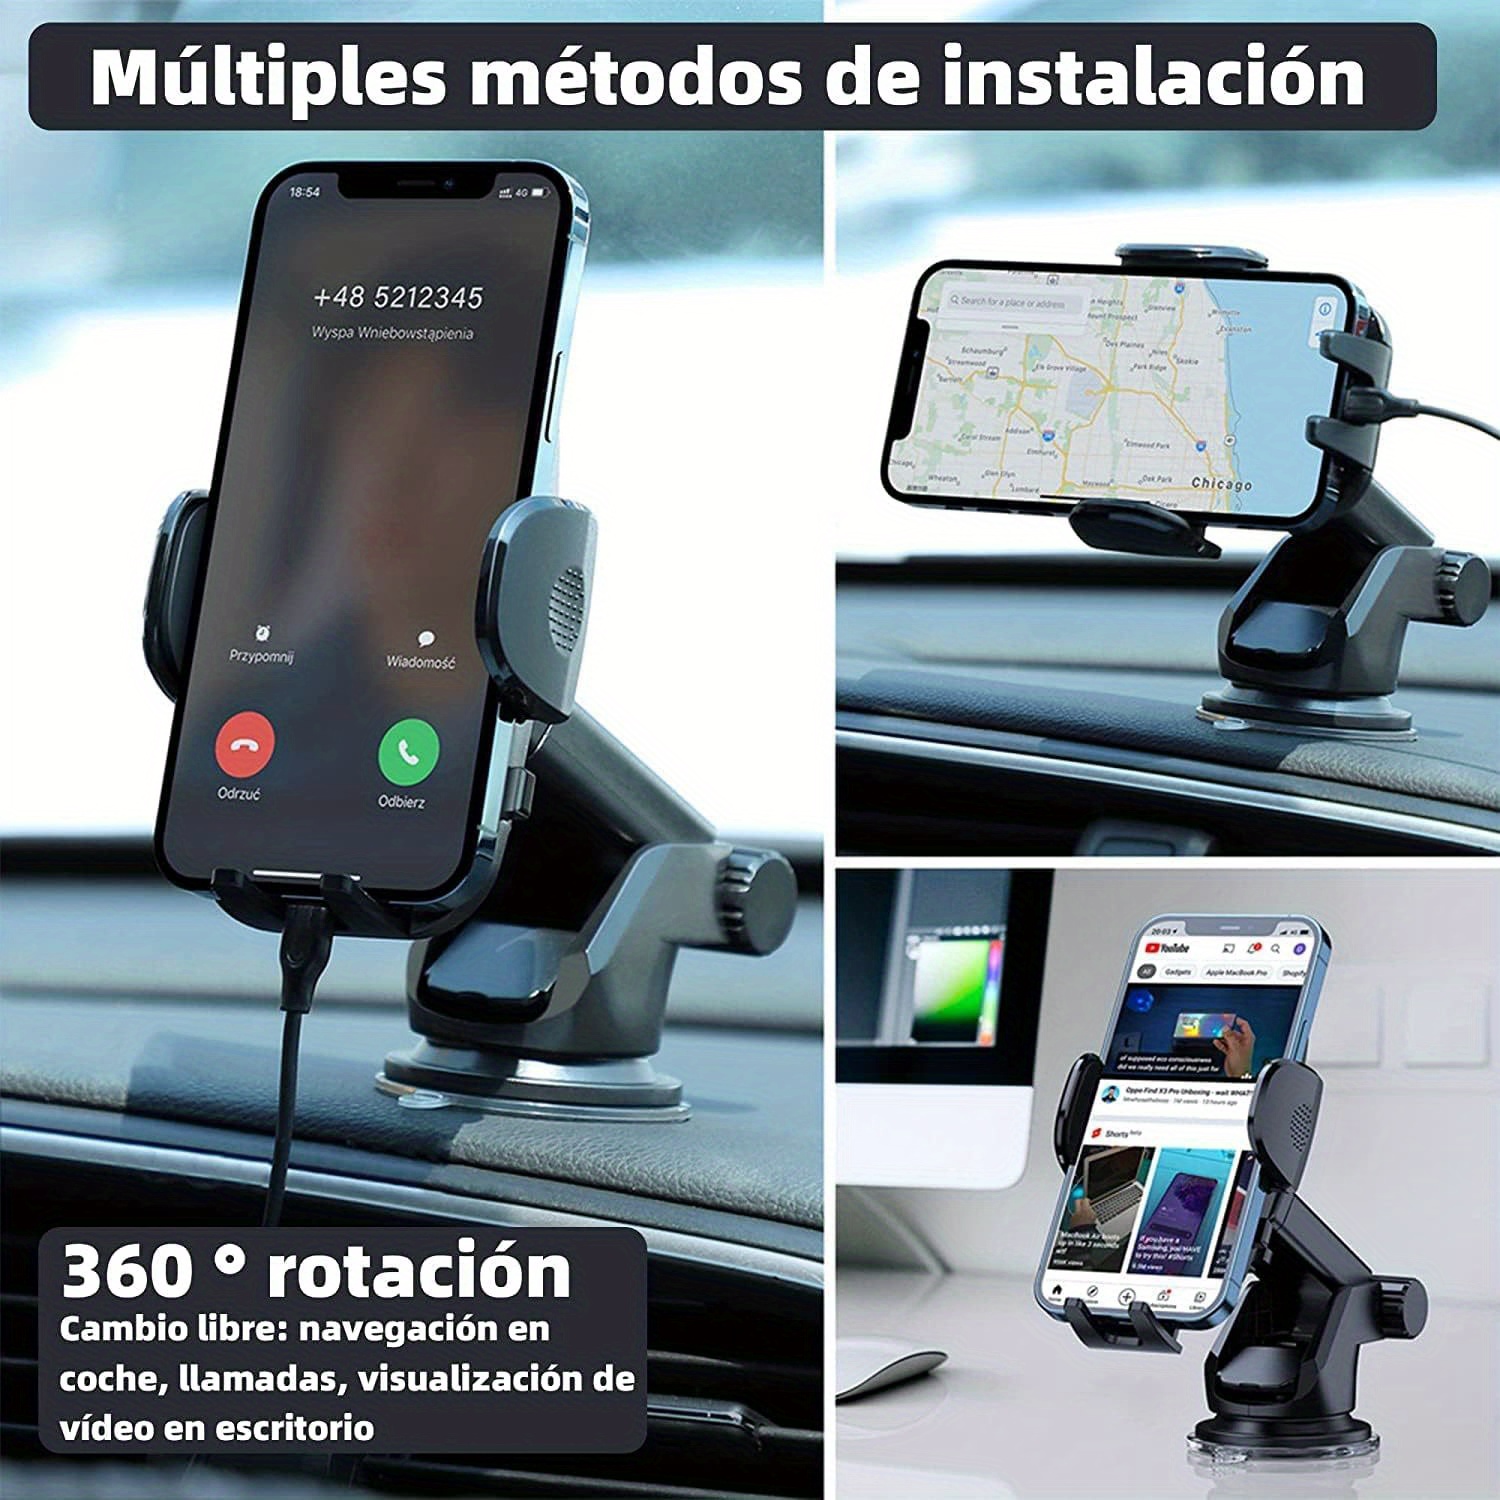 universal new car phone holder mount upgraded adjustable cell phone holder for car dashboard air vent compatible with all smartphones